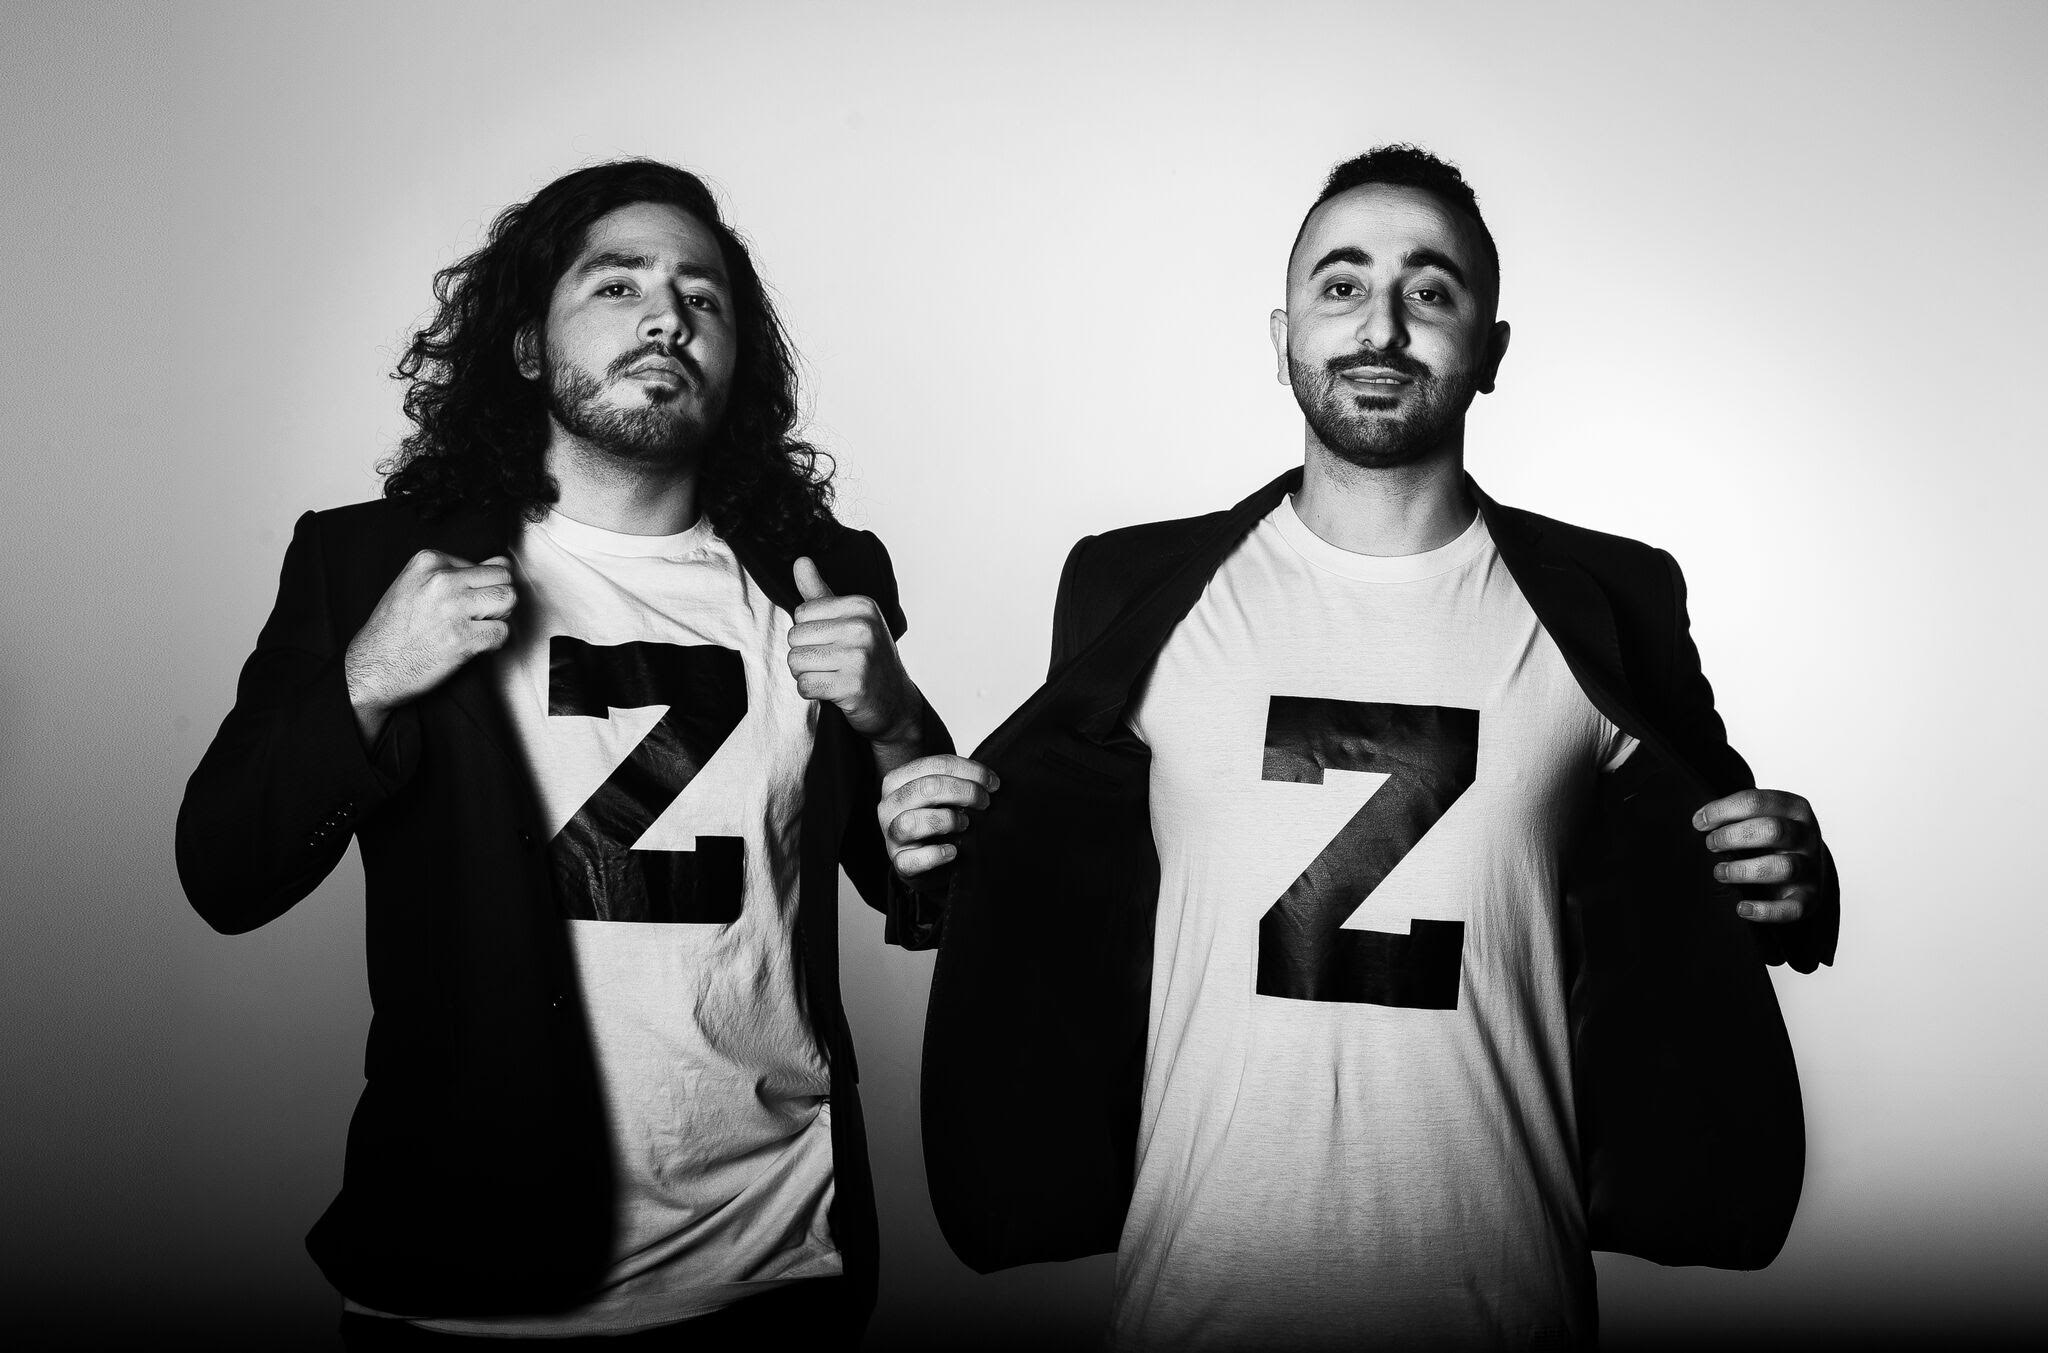 Z & Z Bring The Heat with “Climax”